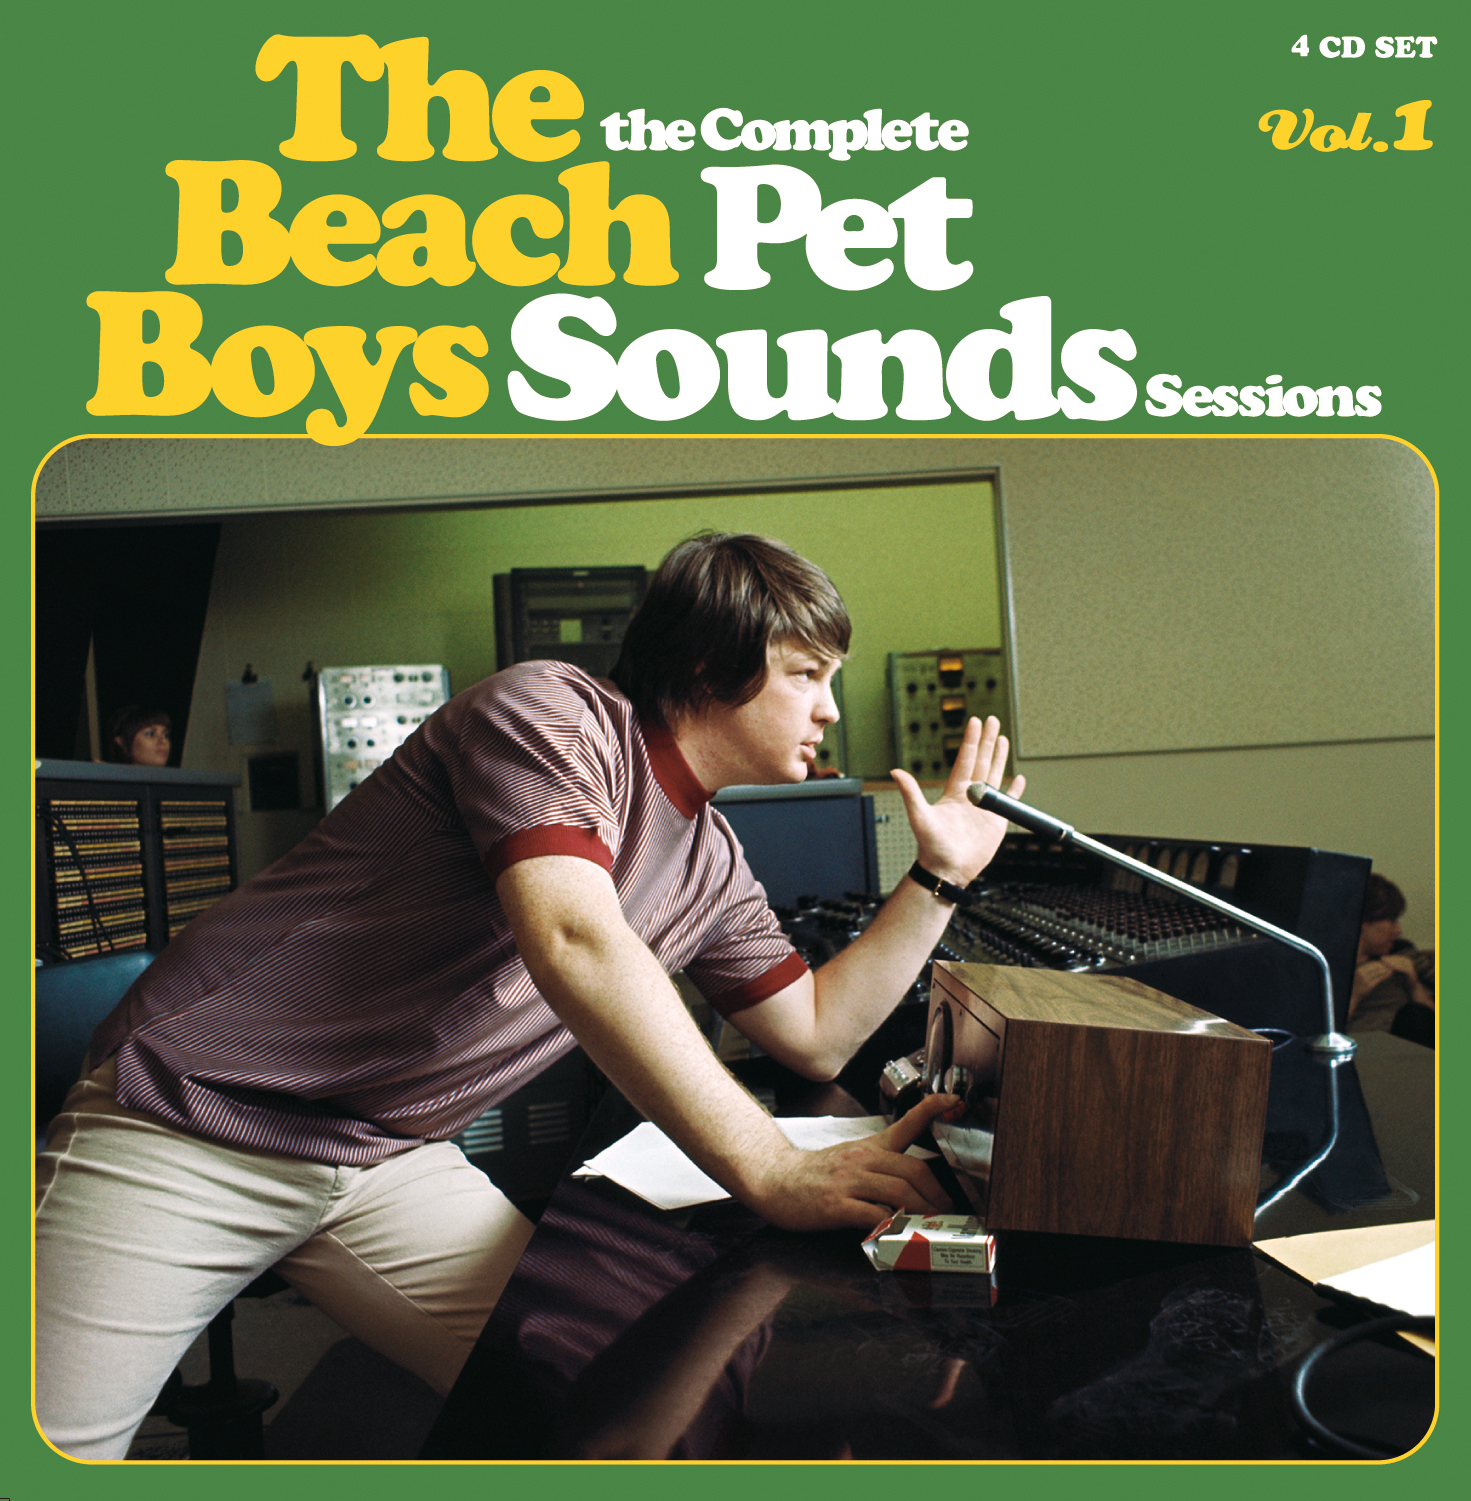 THE BEACH BOYS / the Complete PET SOUNDS Sessions vol.1